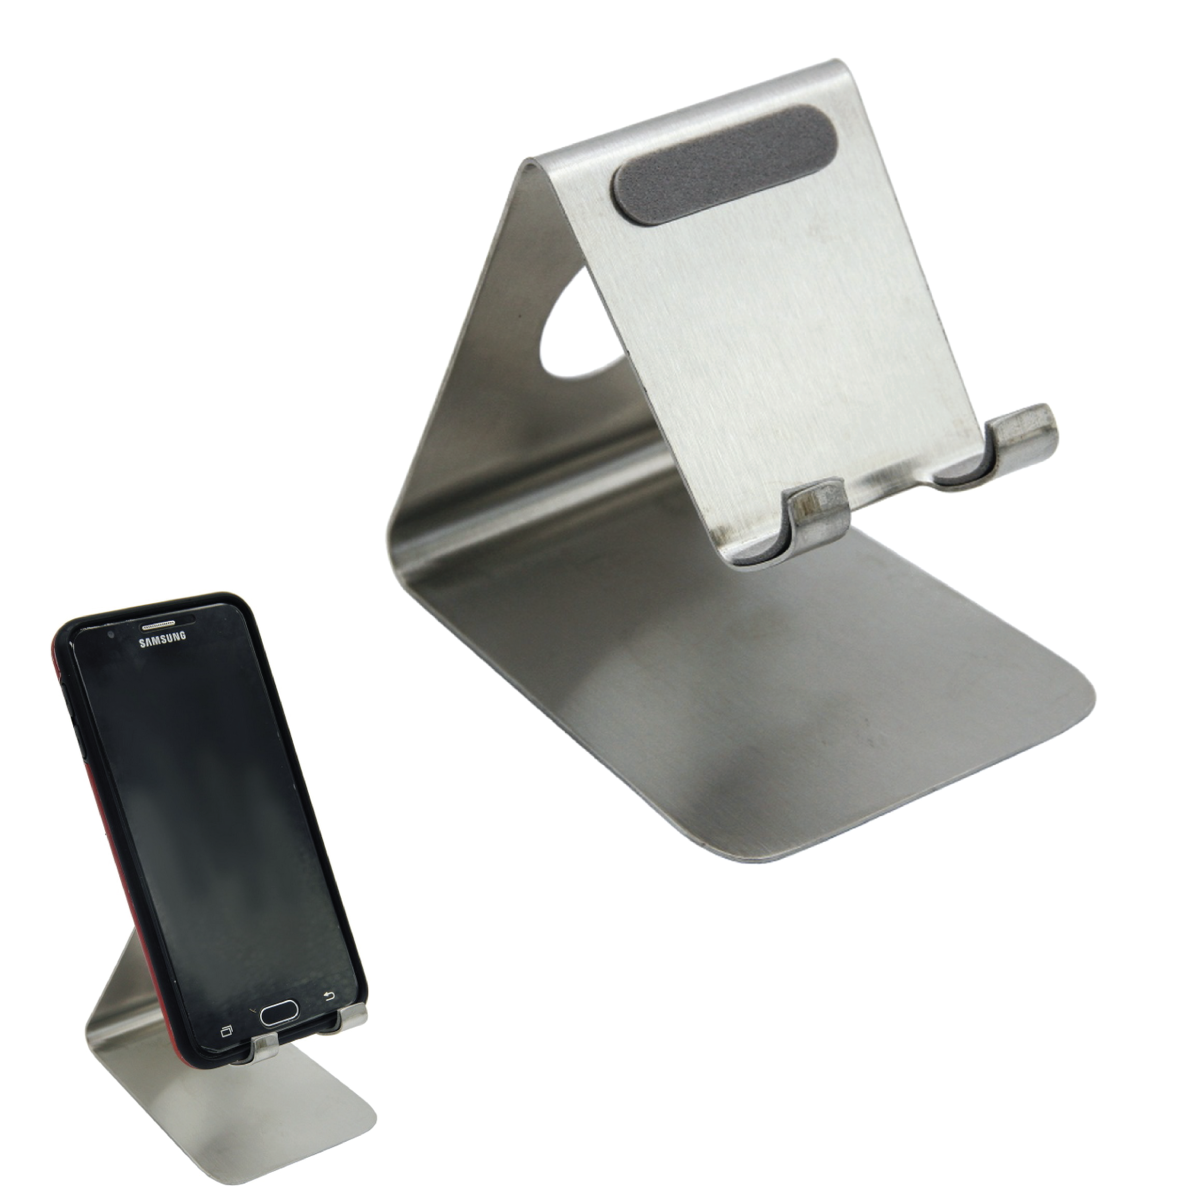 Silver Metal Mirror Finish Universal Mobile Phone Holder Stand - For Personal, Corporate Gifting, Return Gift, Event Gifting, Promotional Freebies JATTMS00